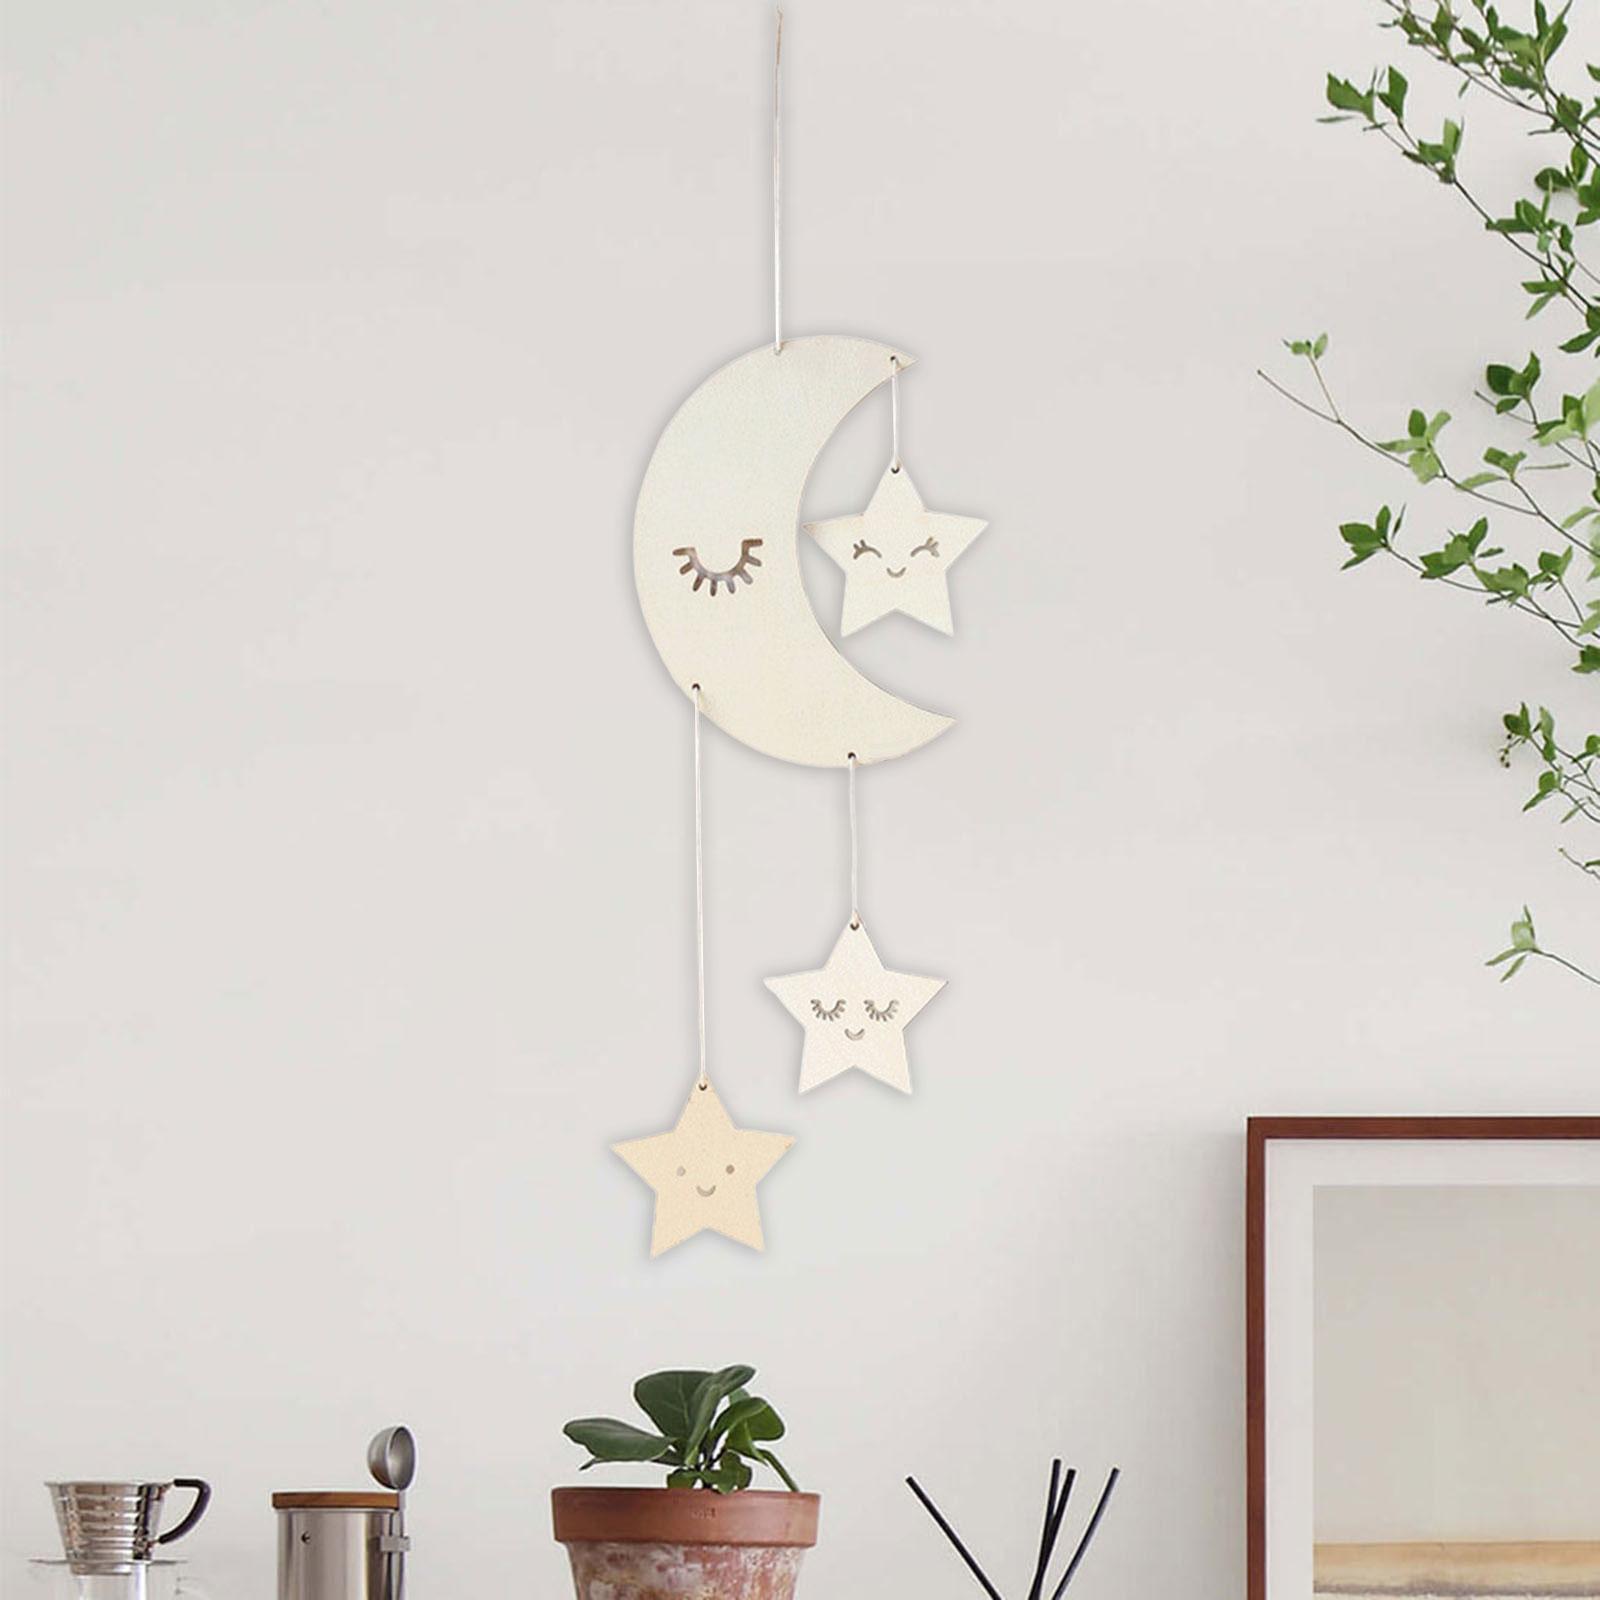 Stars Moon Wall Hanging Decor Boho Ornament for Home Bedroom Decoration